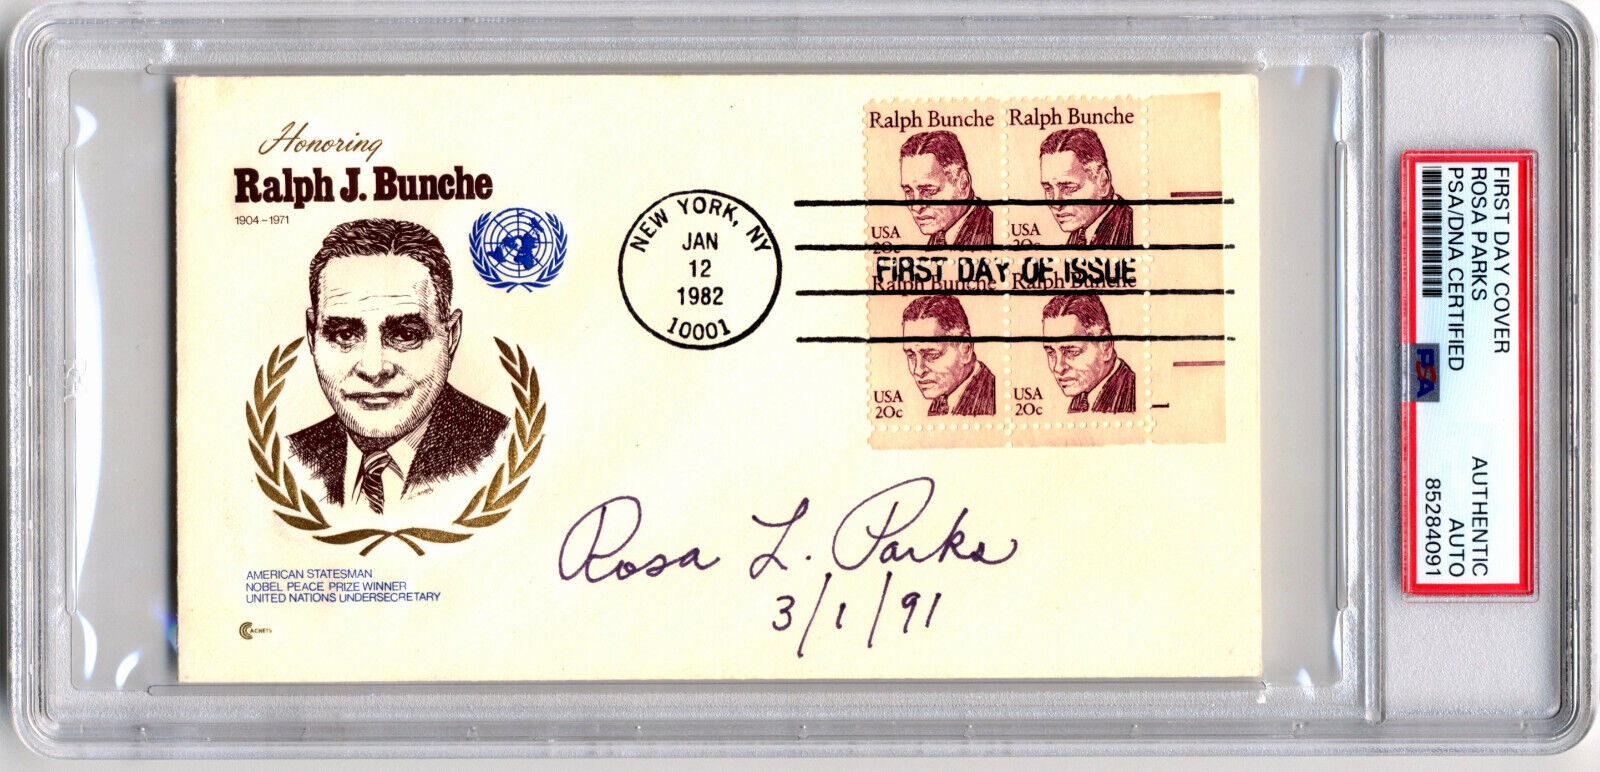 Civil Rights Icon ROSA PARKS Signed First Day Cover - PSA/DNA Auto & JSA Holo